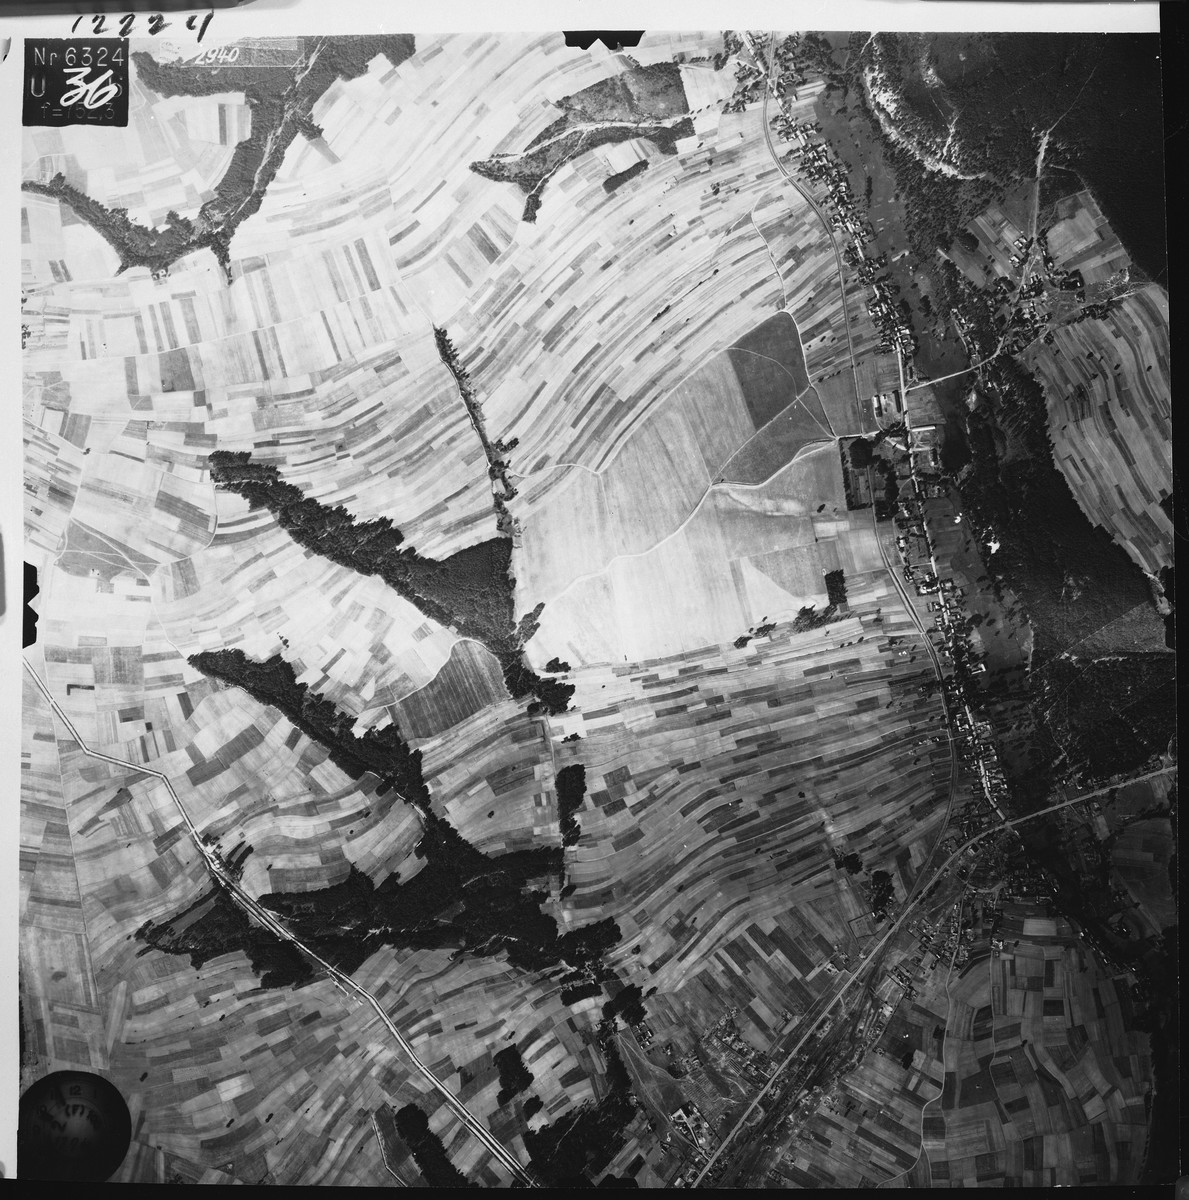 An aerial view of the Belzec area taken by the Luftwaffe during the war.